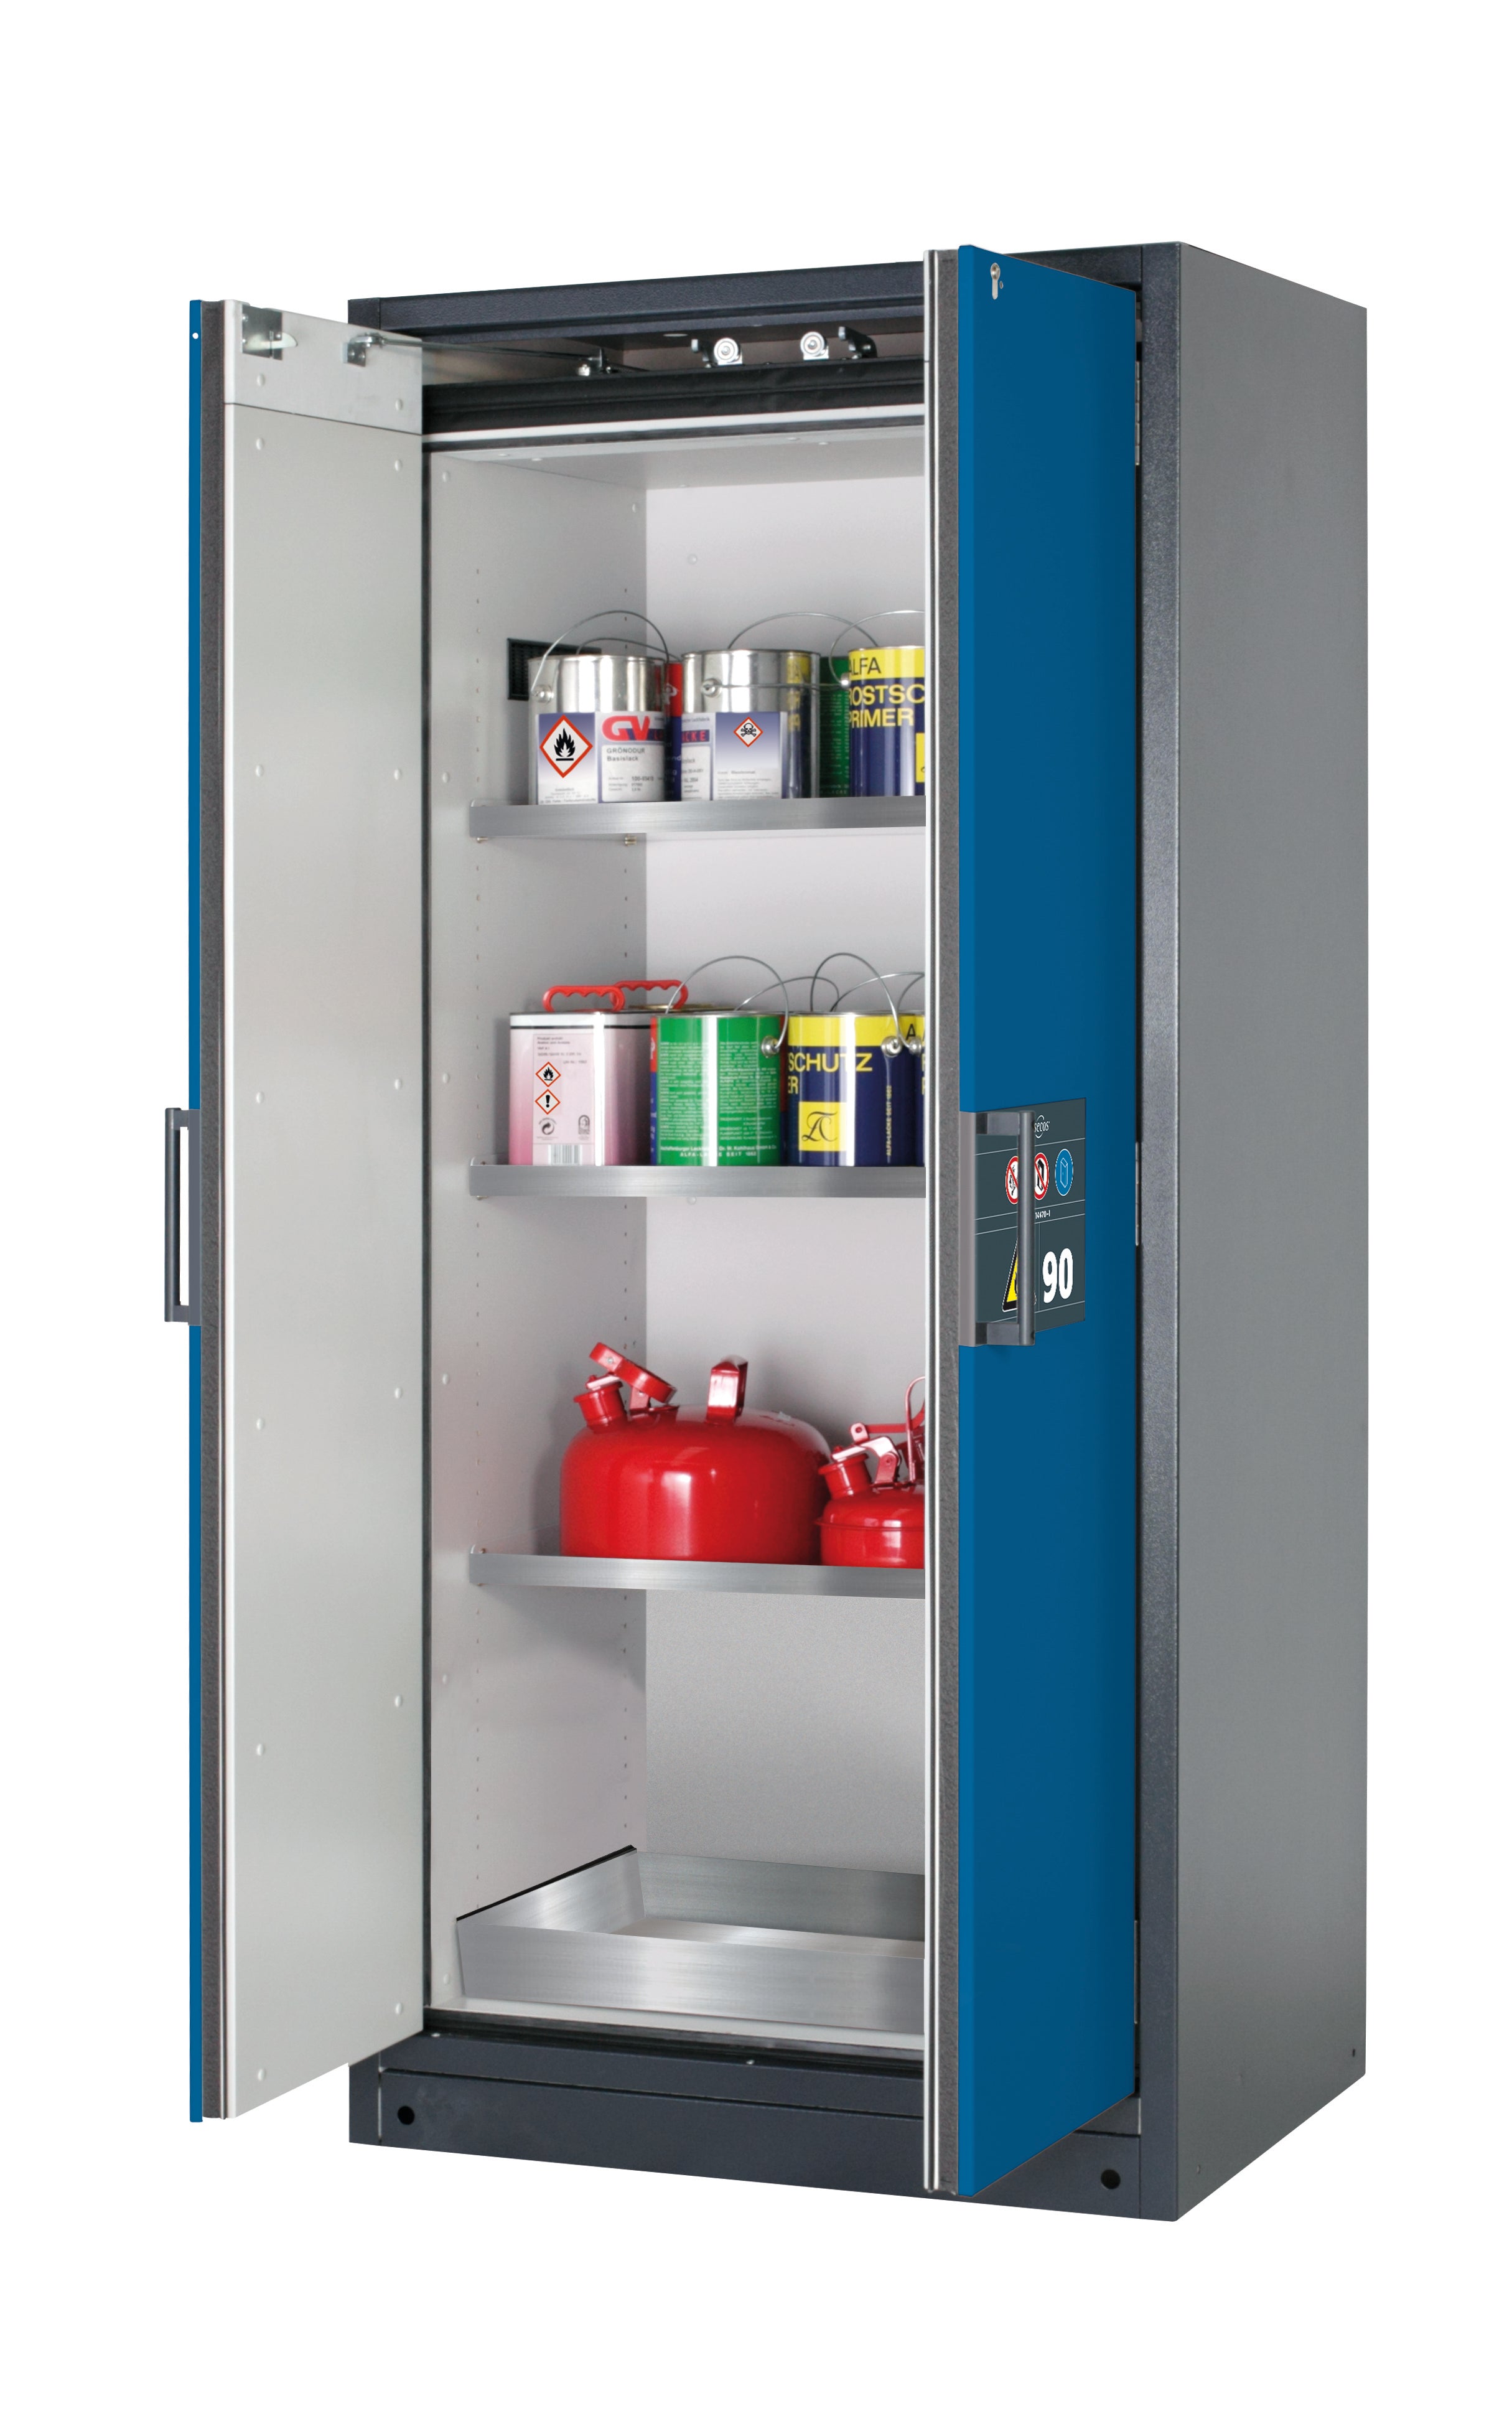 Type 90 safety storage cabinet Q-CLASSIC-90 model Q90.195.090 in gentian blue RAL 5010 with 3x shelf standard (stainless steel 1.4301),